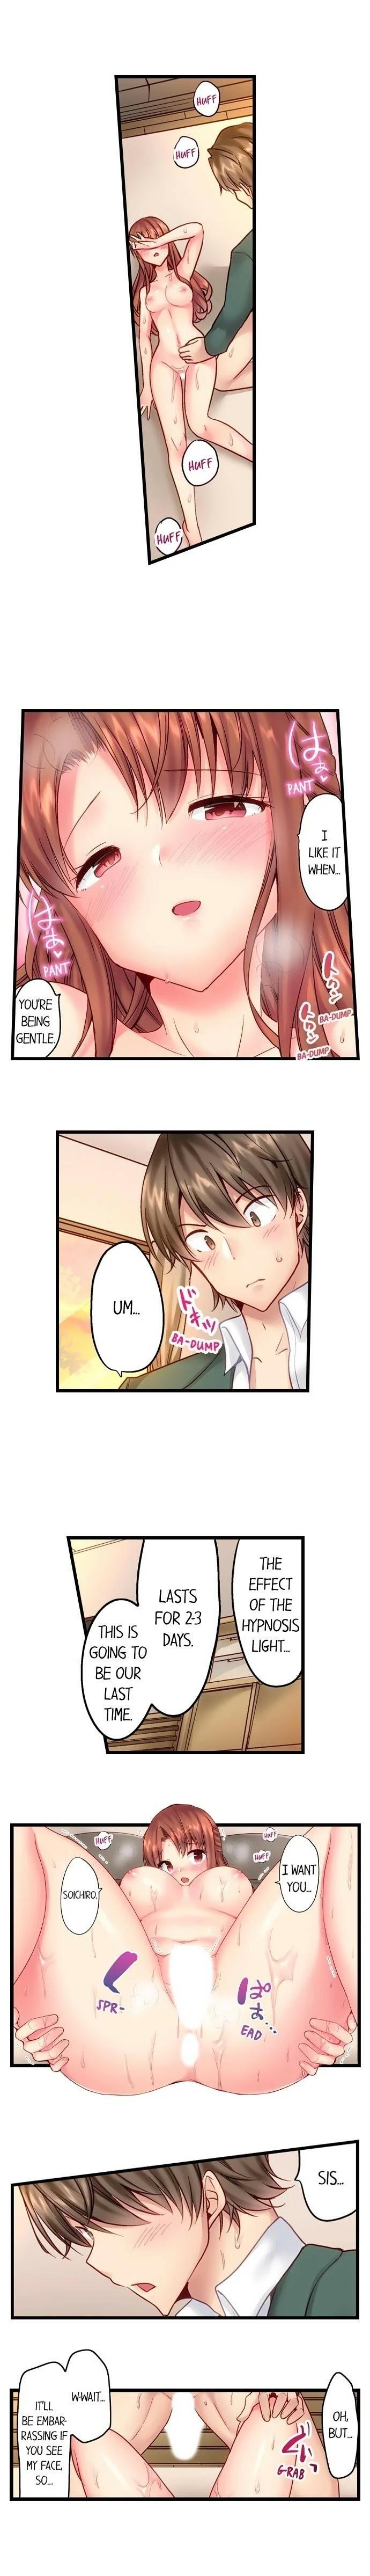 [Yuuki HB] "Hypnotized" Sex with My Brother Ch.21/? [English] [Ongoing] 73